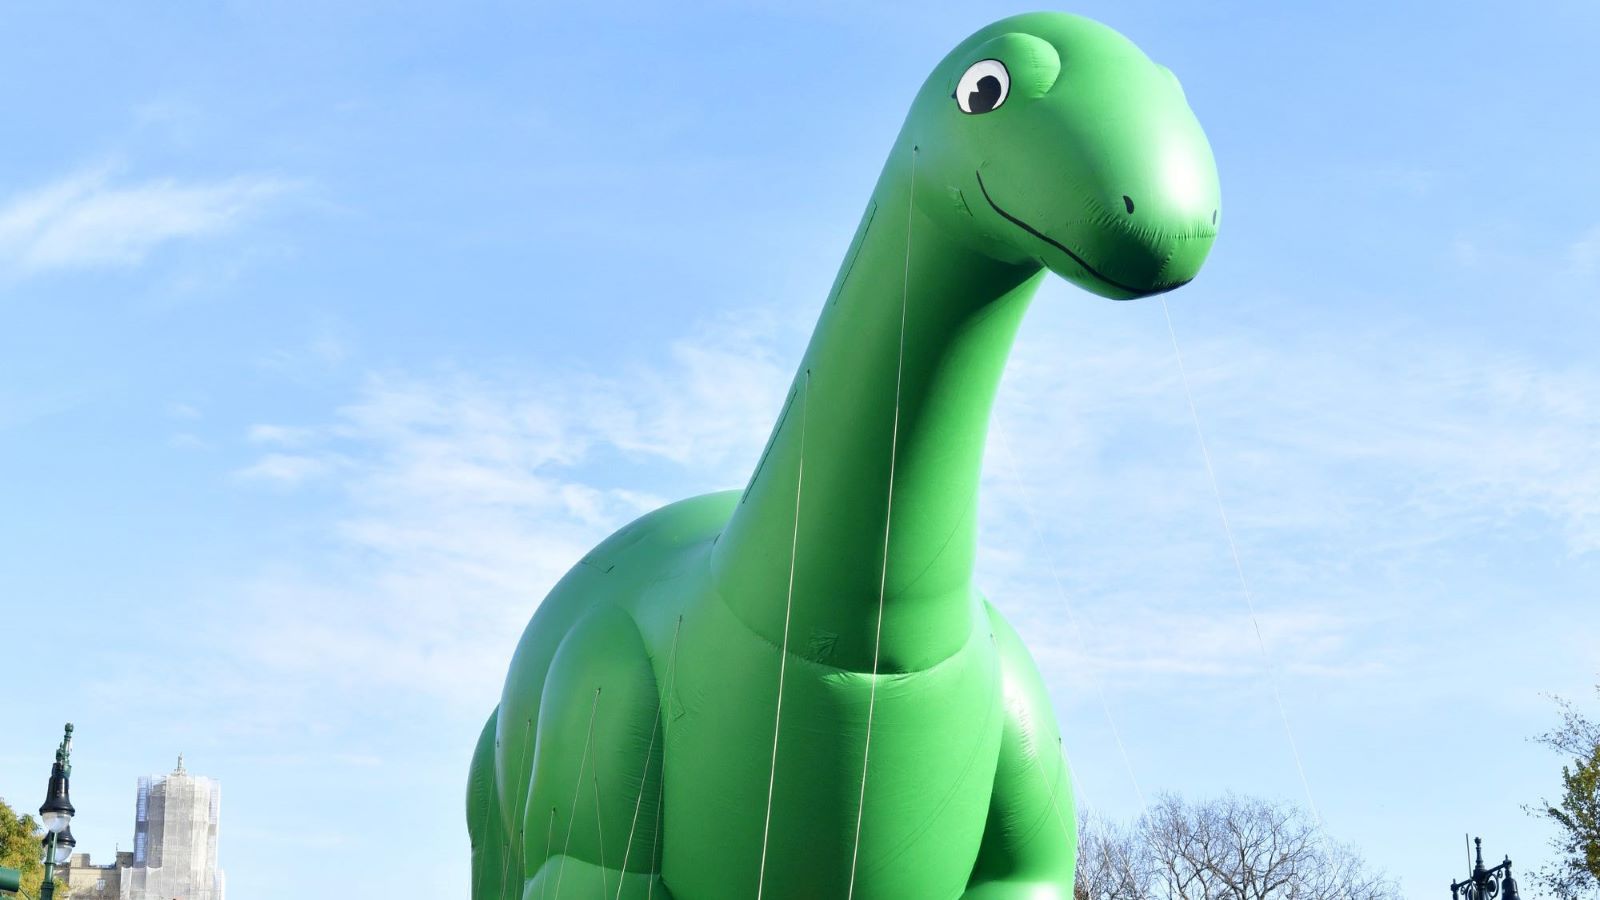 Why Are the Sinclair Oil Corporation’s Dinosaurs in the Macy’s Thanksgiving Day Parade?